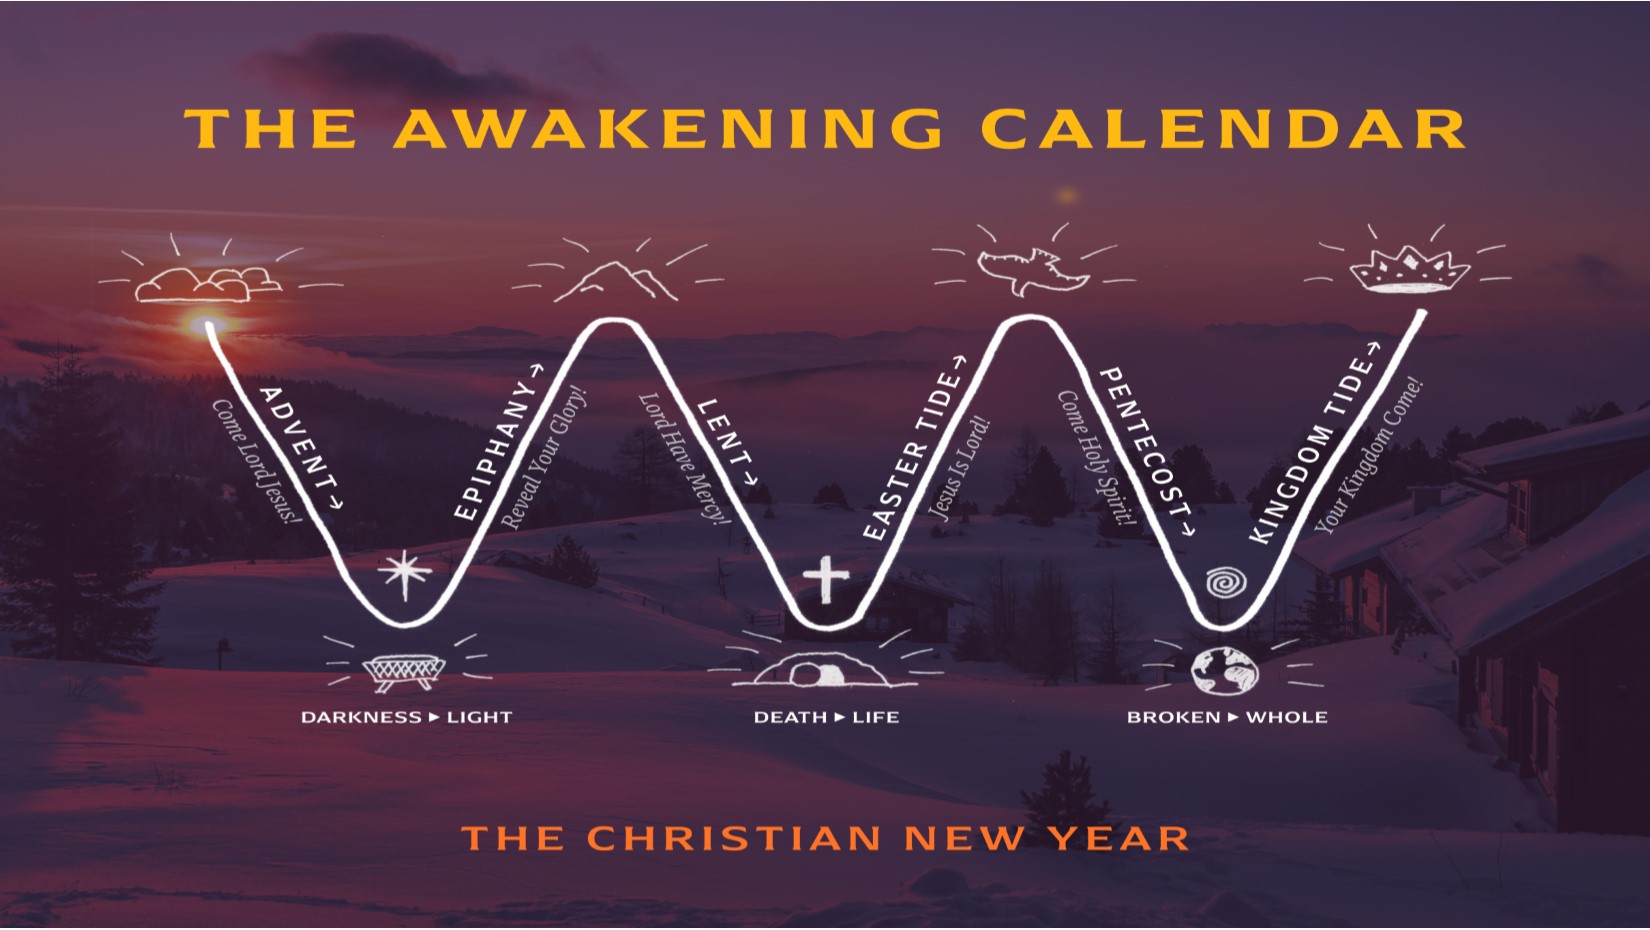 12/13/20 Third Sunday of Advent The Christian New Year: A New Year of Realignment